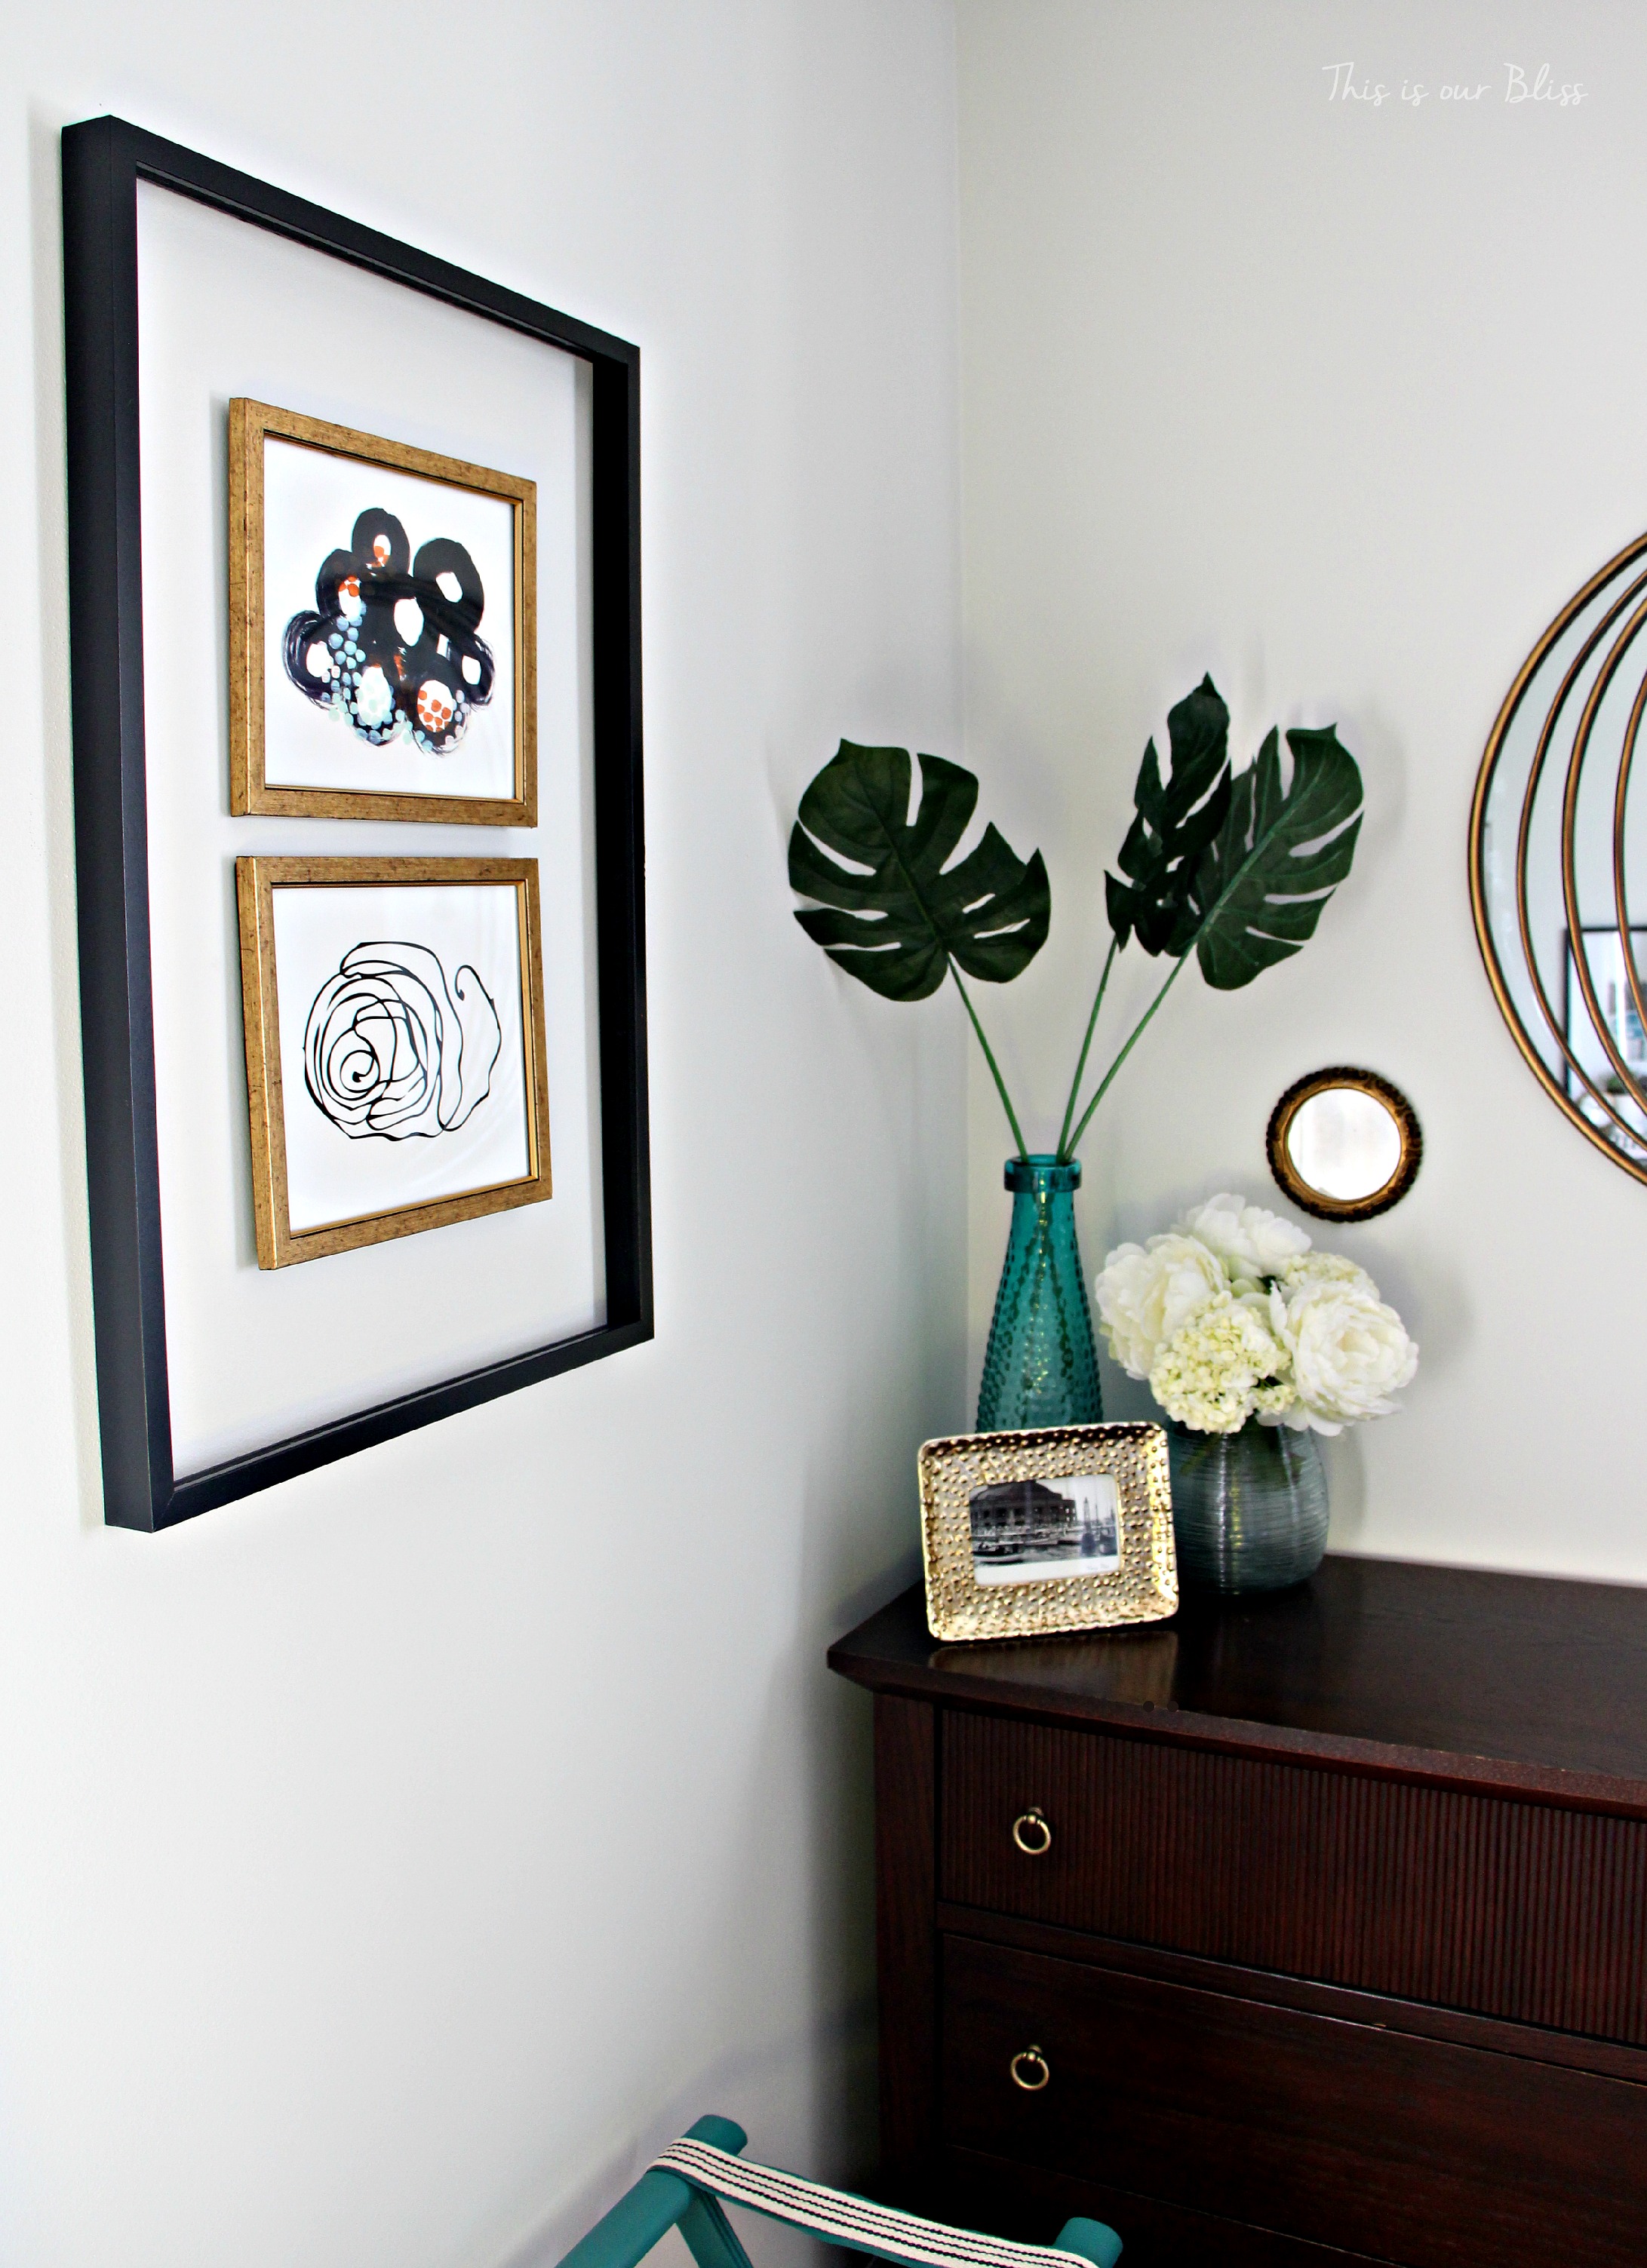 Guestroom revamp - Minted art - open frame - luggage rack - - dresser - fresh flowers - This is our Bliss